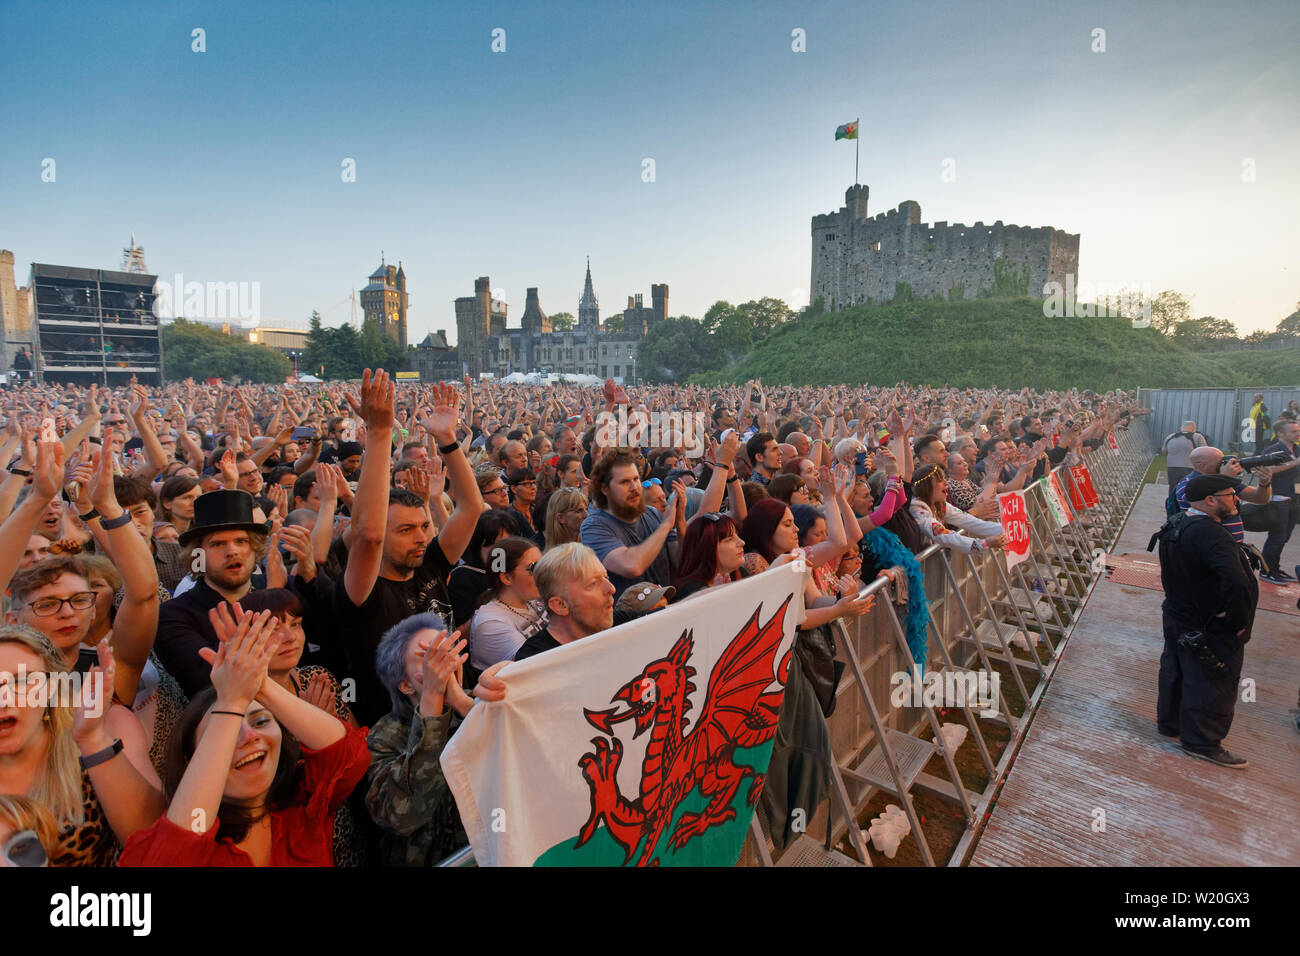 Pictured: Manic Street Preachers fans. Saturday 29 June 2019 Re: Manic Street Preachers concert at Cardiff Castle, south Wales, UK. Stock Photo